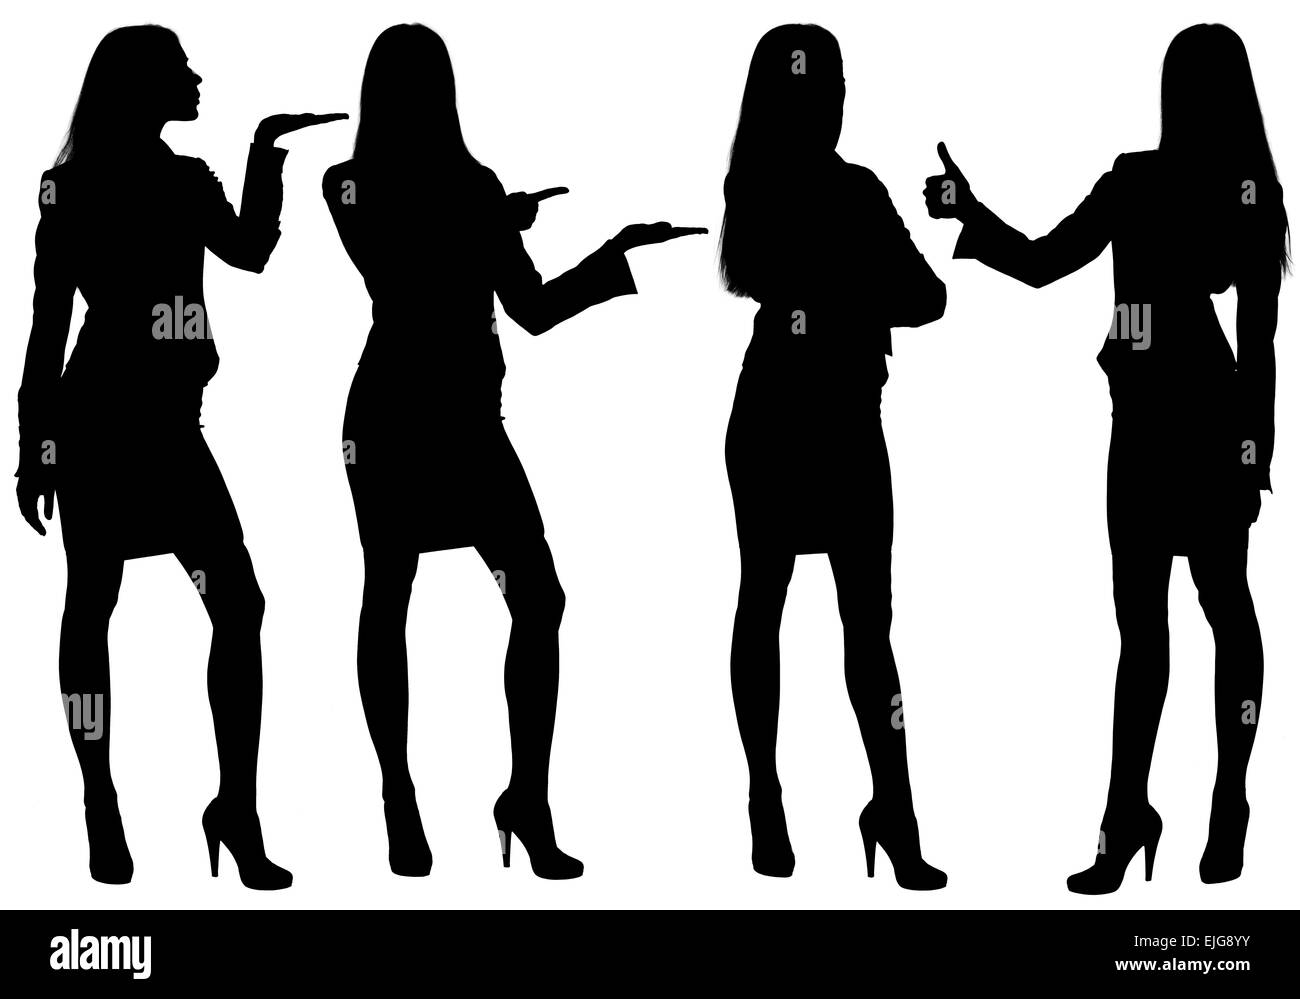 Business woman standing silhouette showing gestures Stock Photo